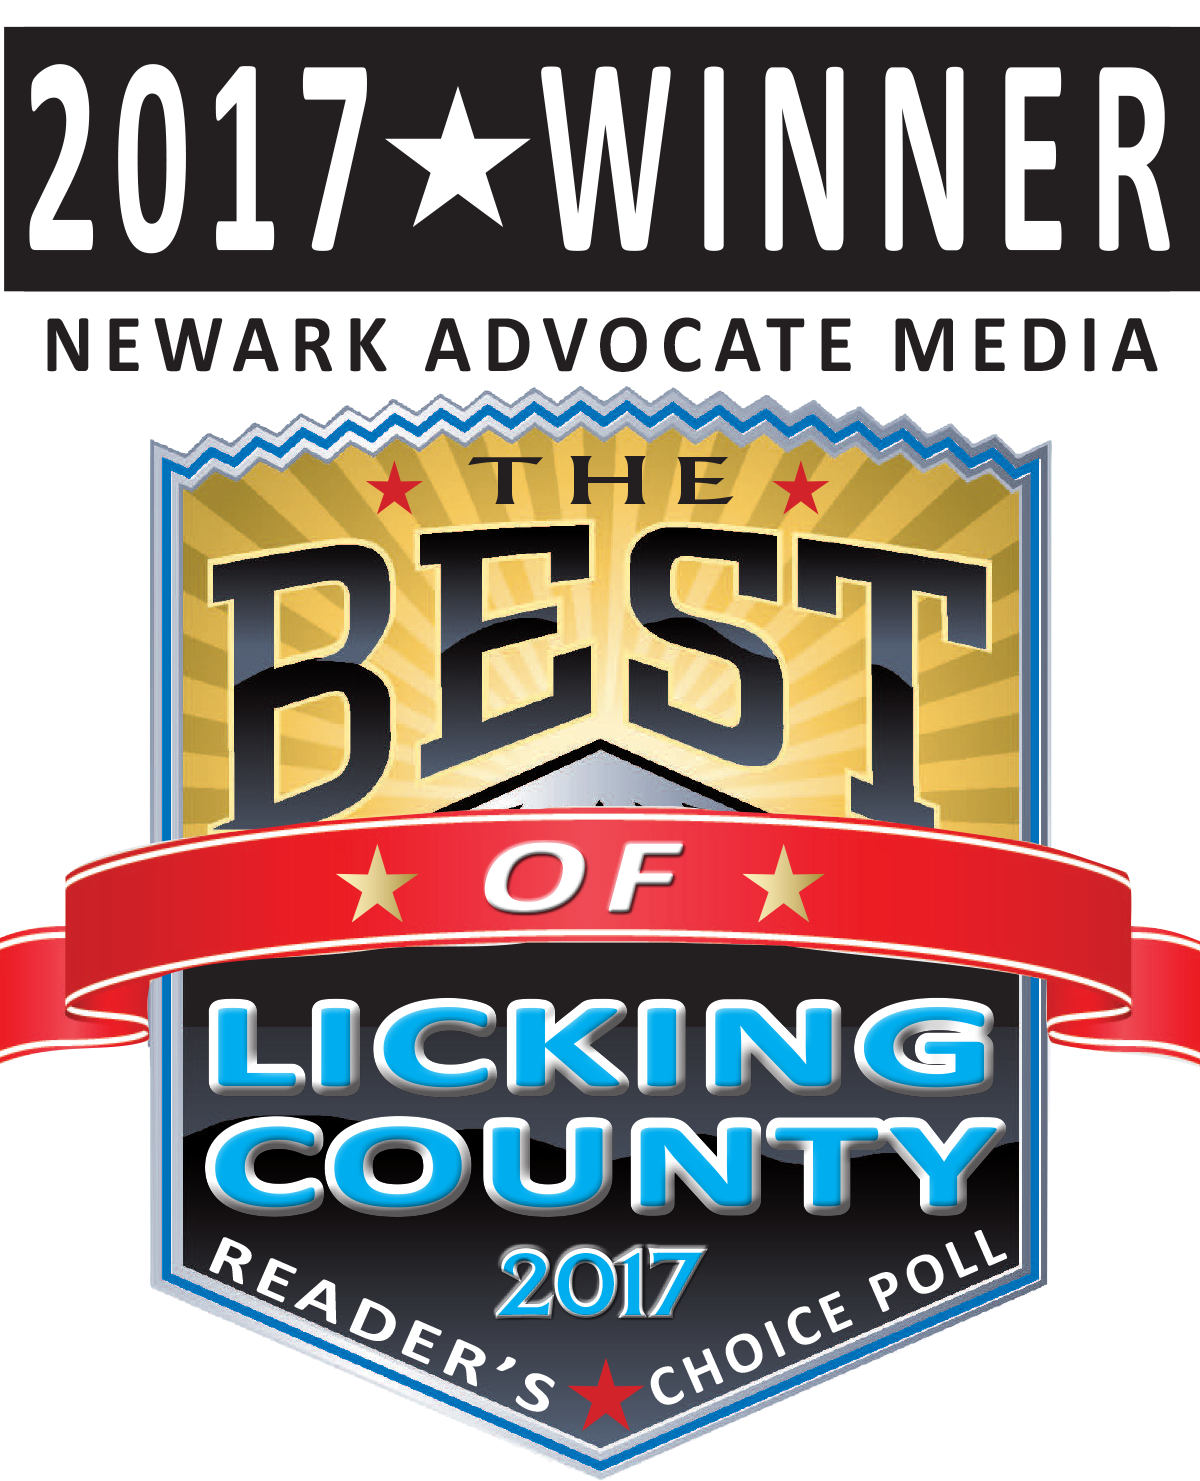 Best of Licking County 2017